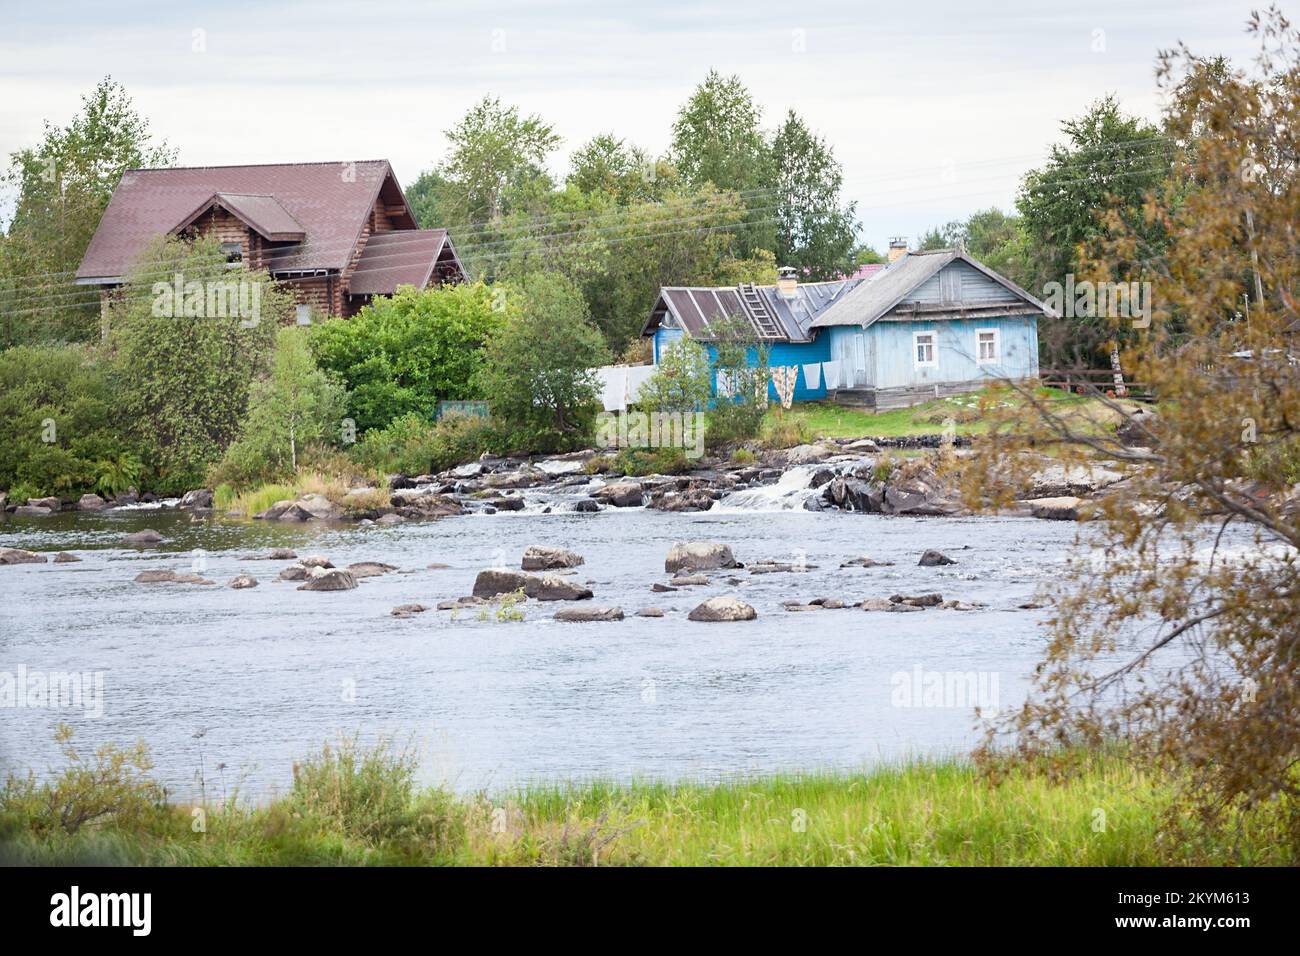 An old wooden house and a new cottage on the banks of the Nizhny Vyg river, Belomorsk city, Karelia, Russia Stock Photo